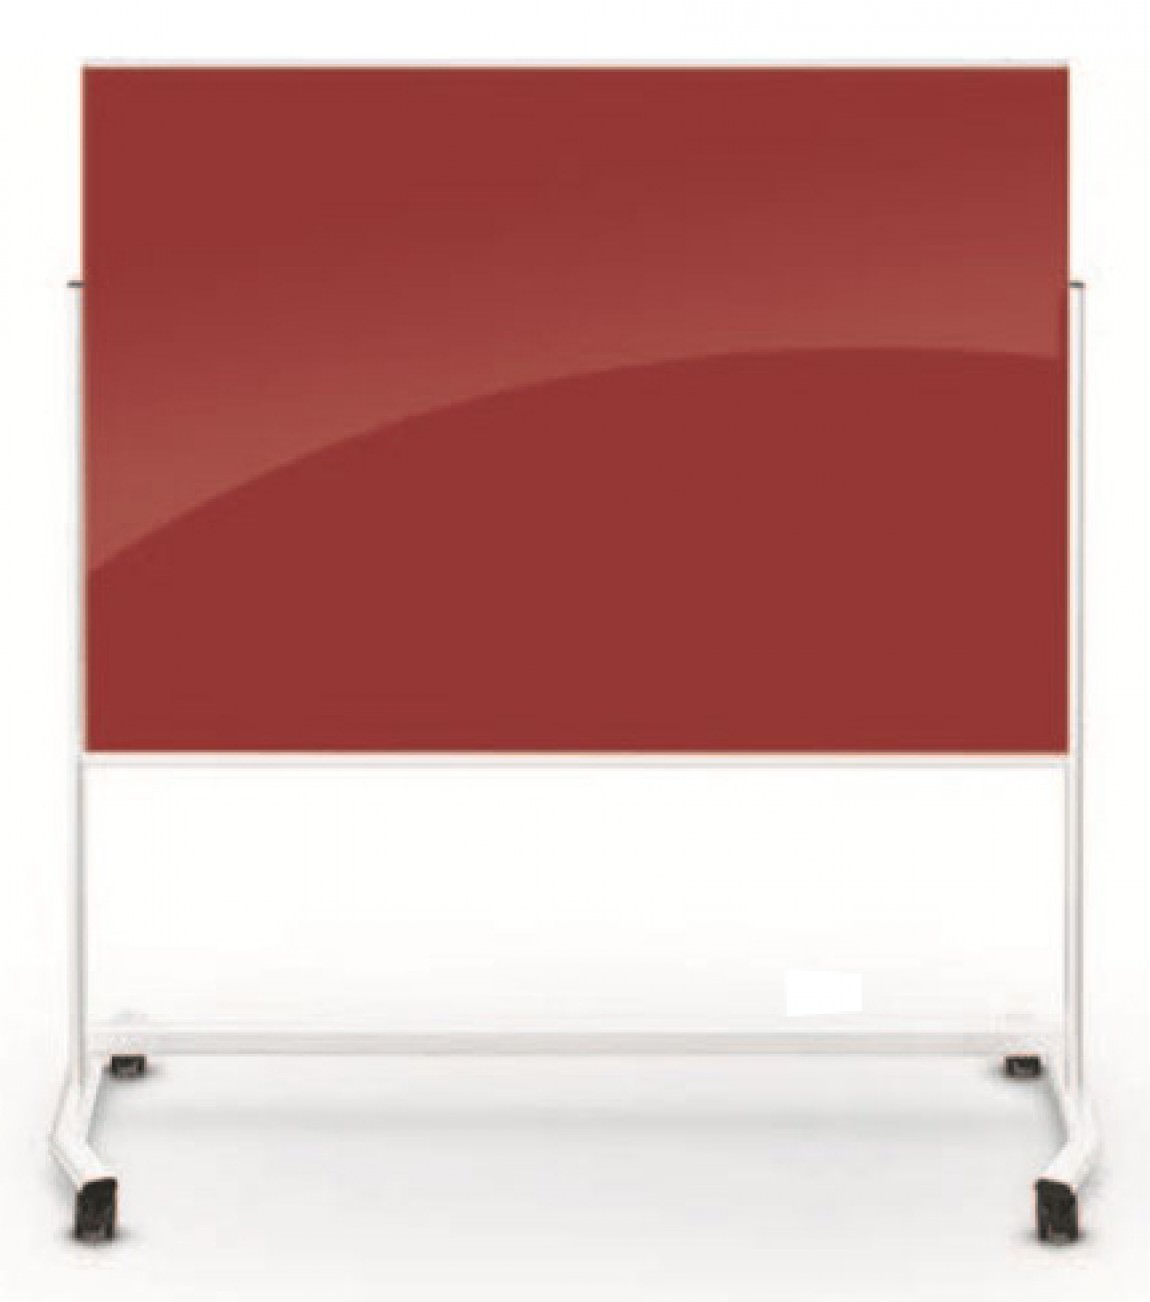 Double Sided (Magnetic) White Board Stand (Red